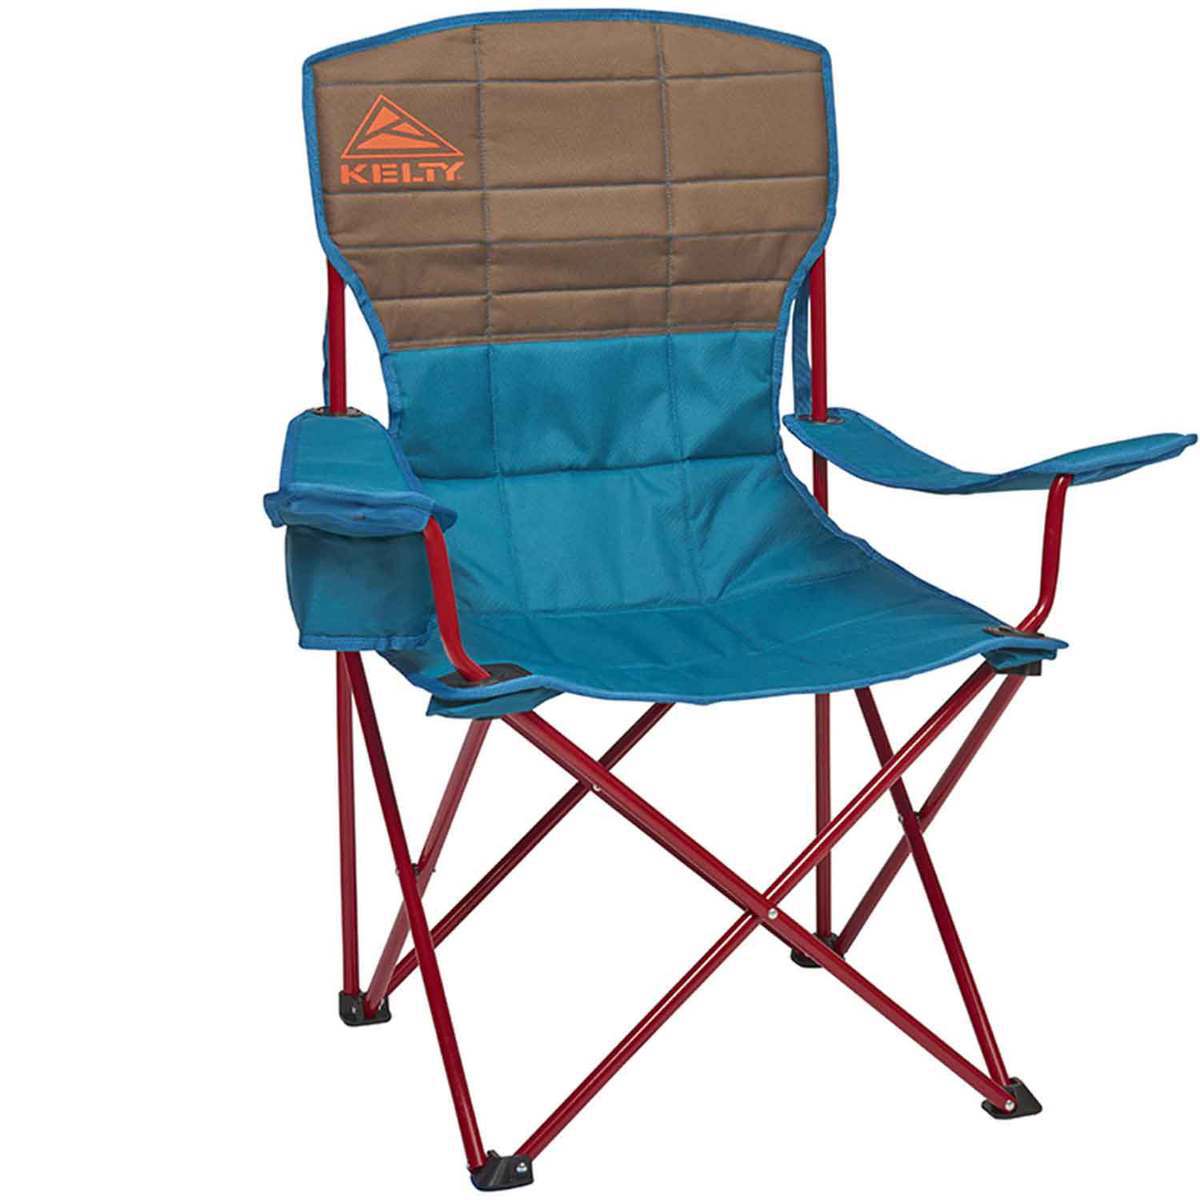 Sportsman's Warehouse Oversized Mesh Quad Chair - 300 lbs Weight Capacity - Red